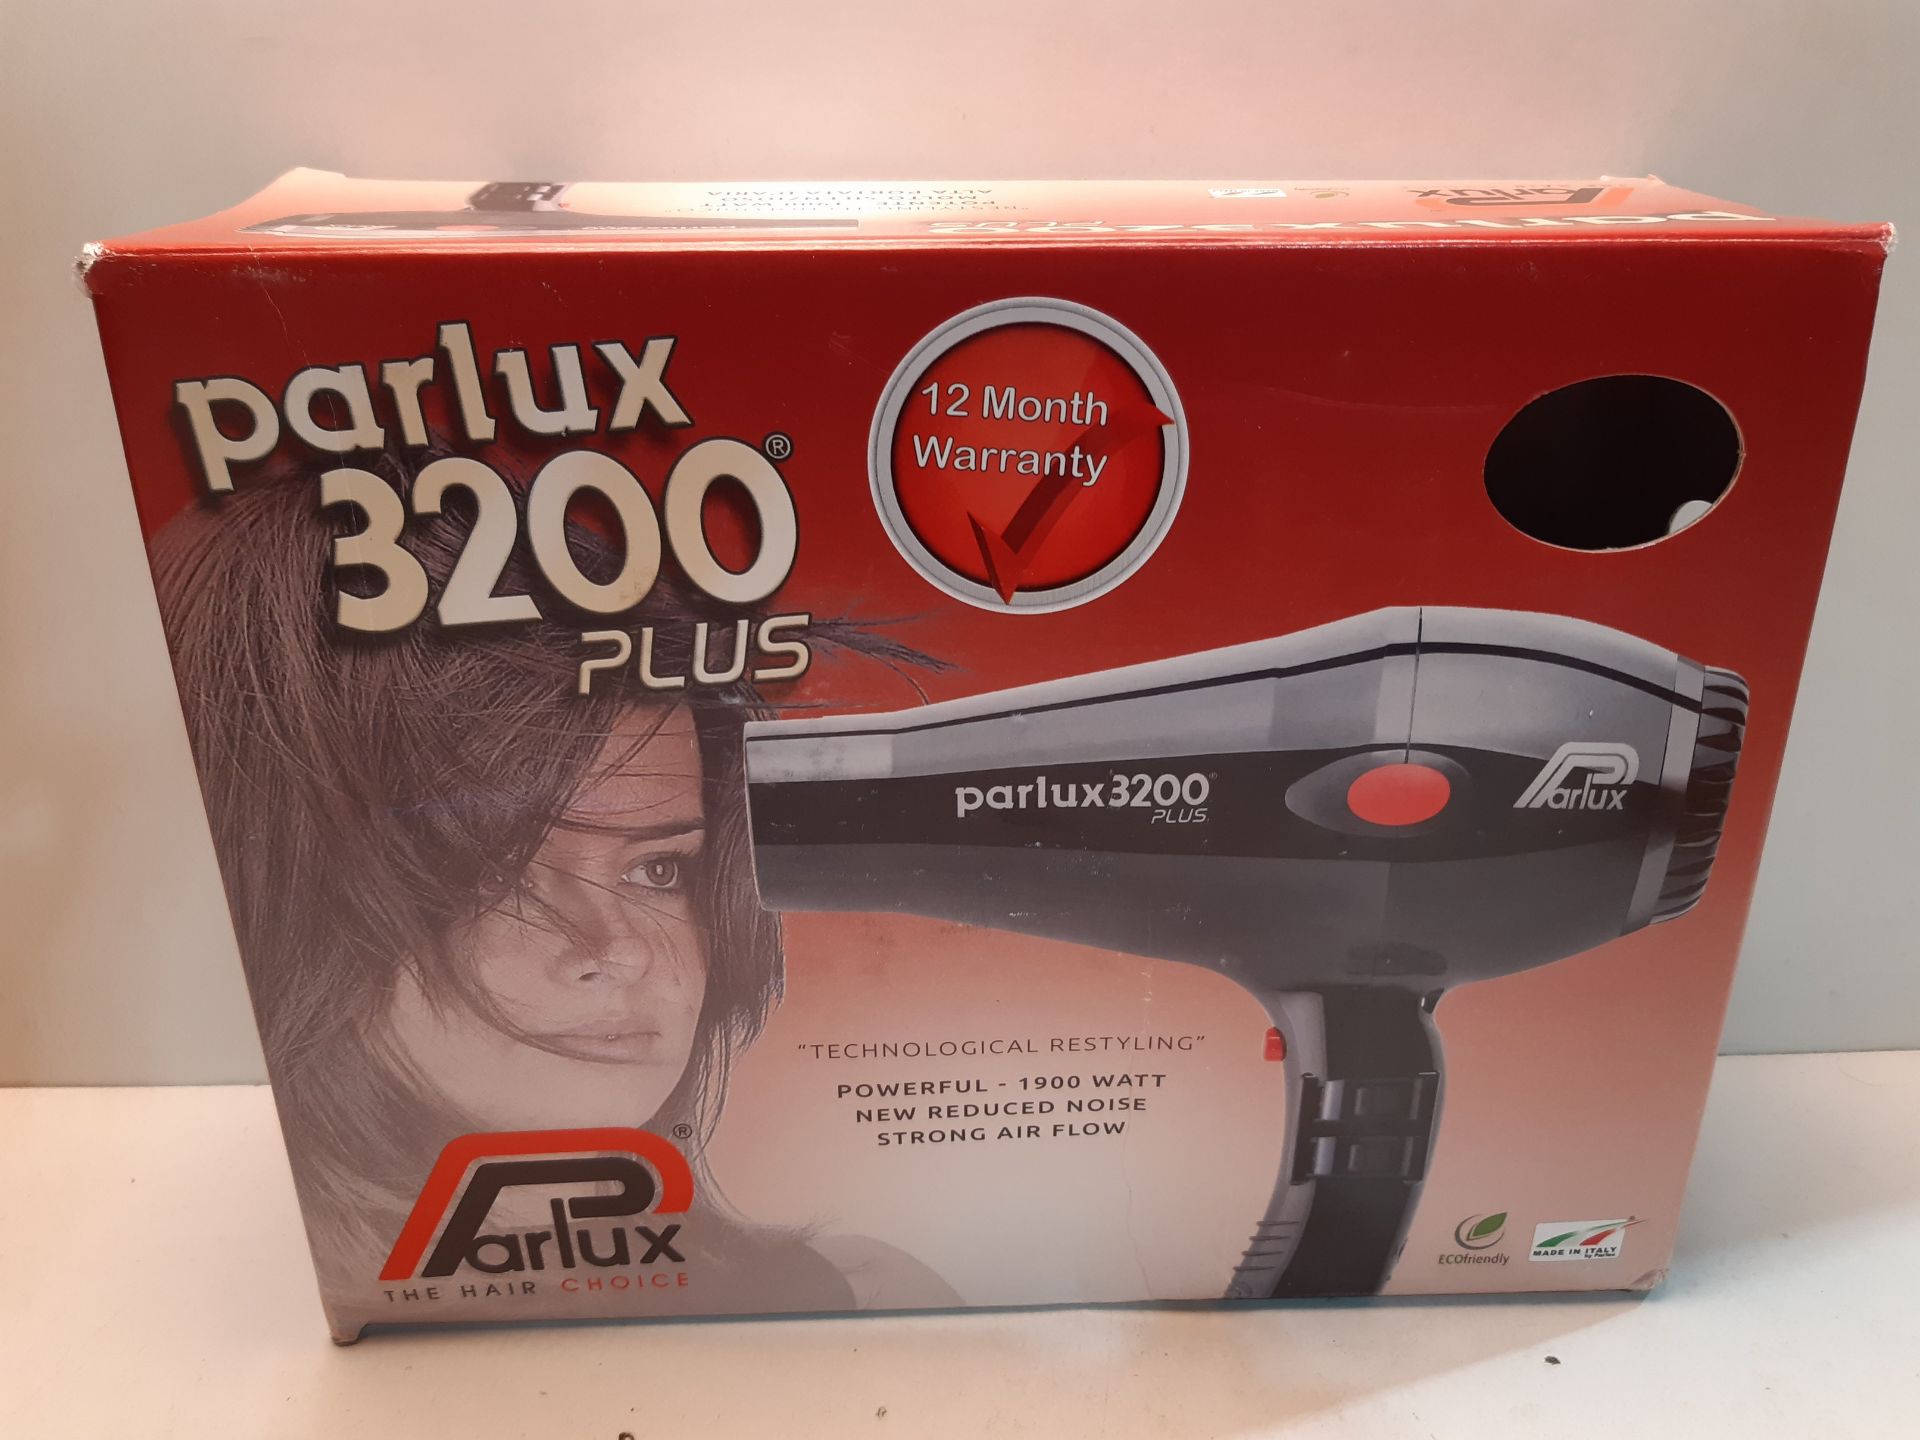 RRP £89.95 Parlux 3200 Plus Raunchy Hairdryer Red - Image 2 of 2